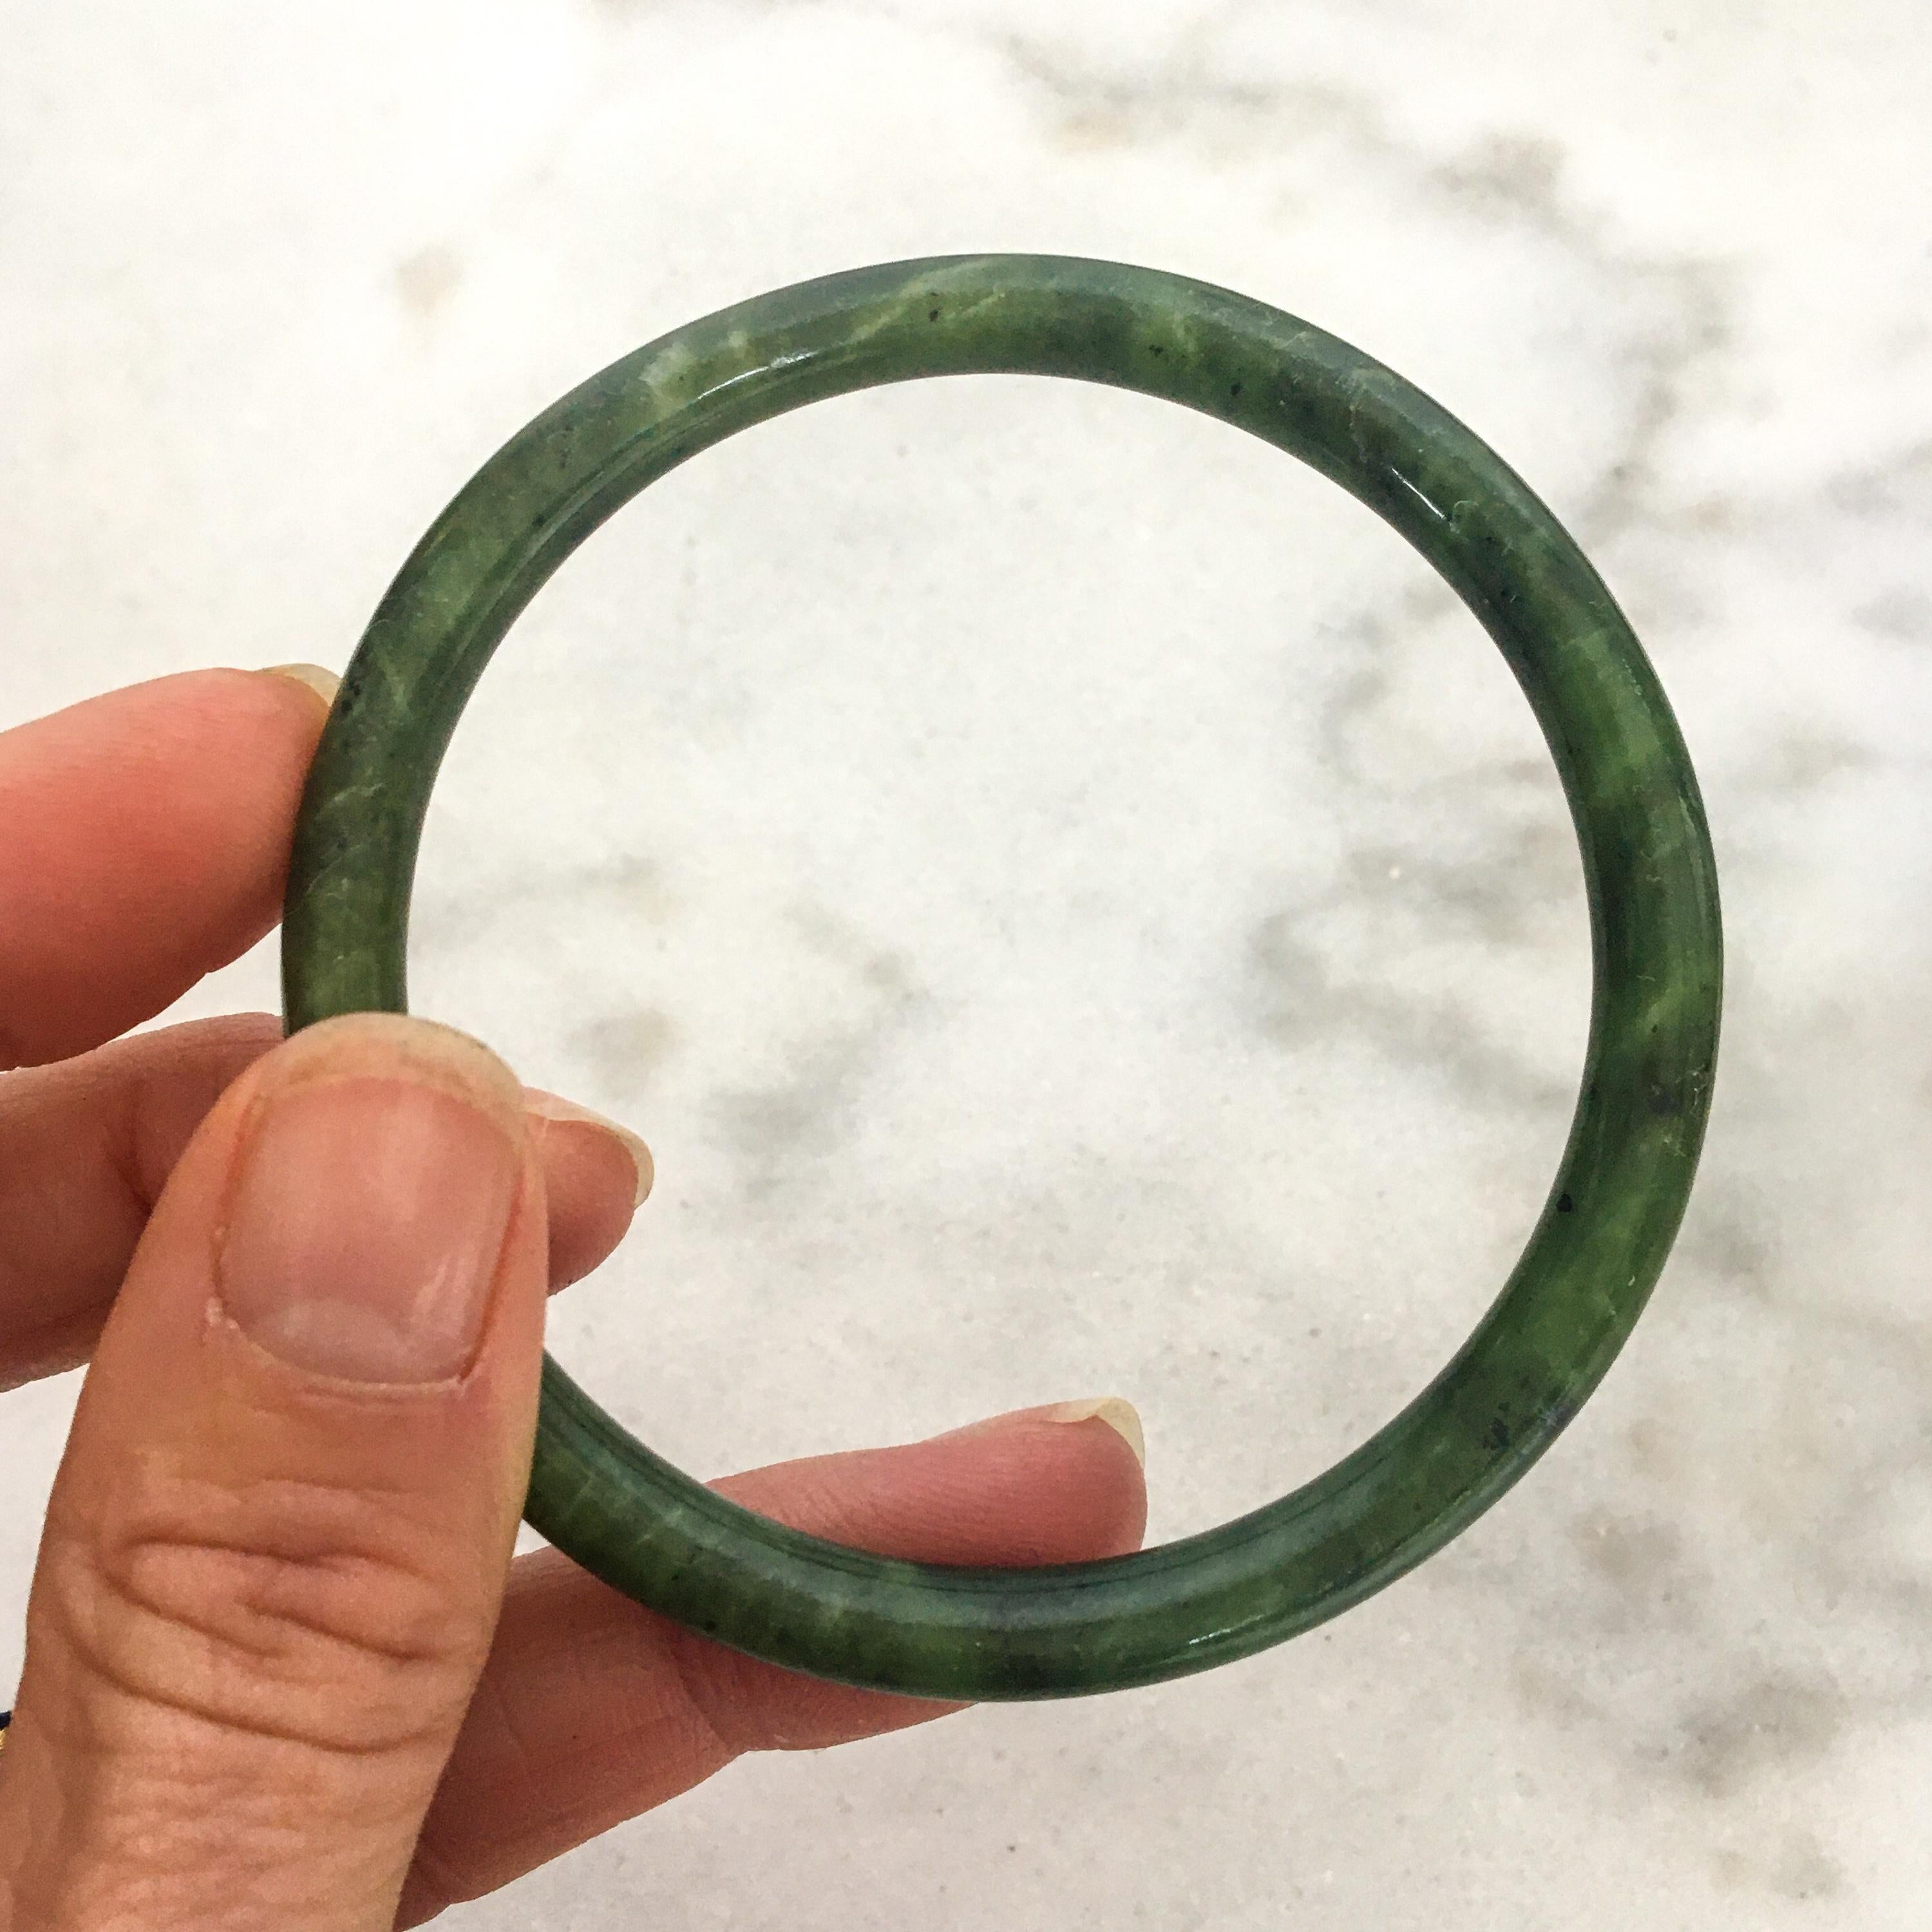 Dark green nephrite jade bangle bracelet made into a smooth round design. As a bangle requires a bigger piece of jade material, black spots that are commonly found are unavoidable. However, its good lustre and beautiful intense green more than